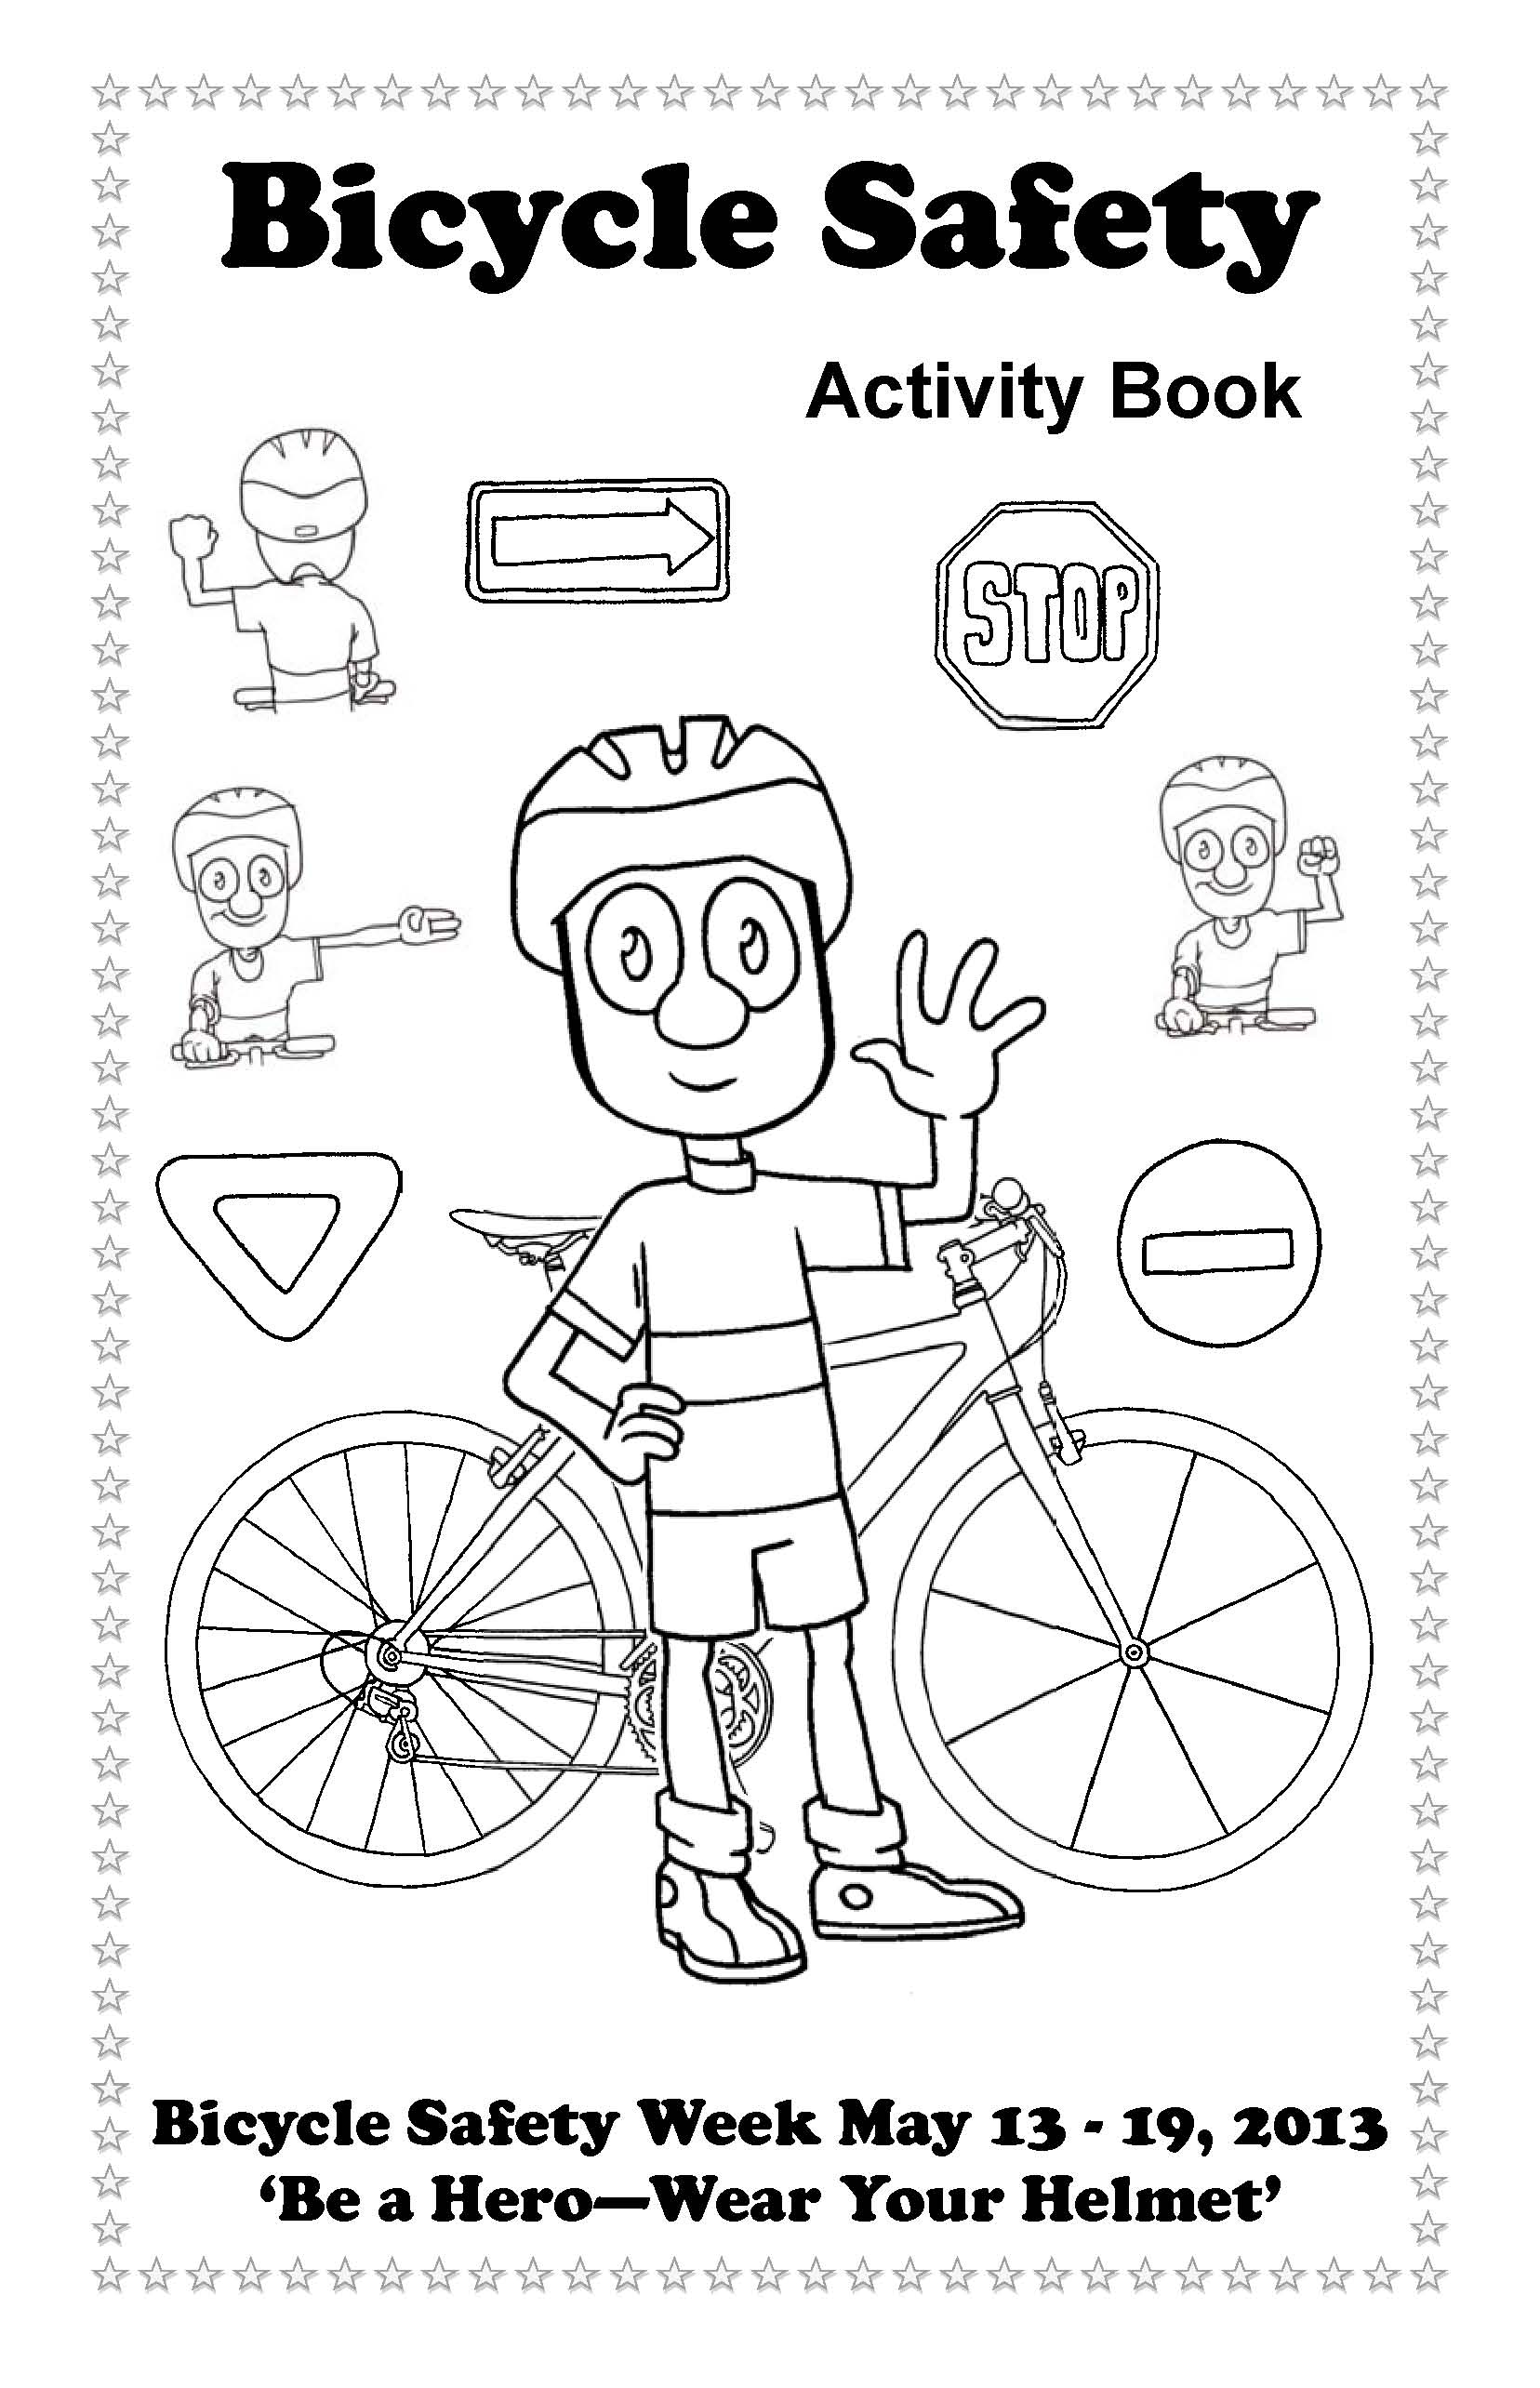 bike-safety-coloring-pages-9.jpg